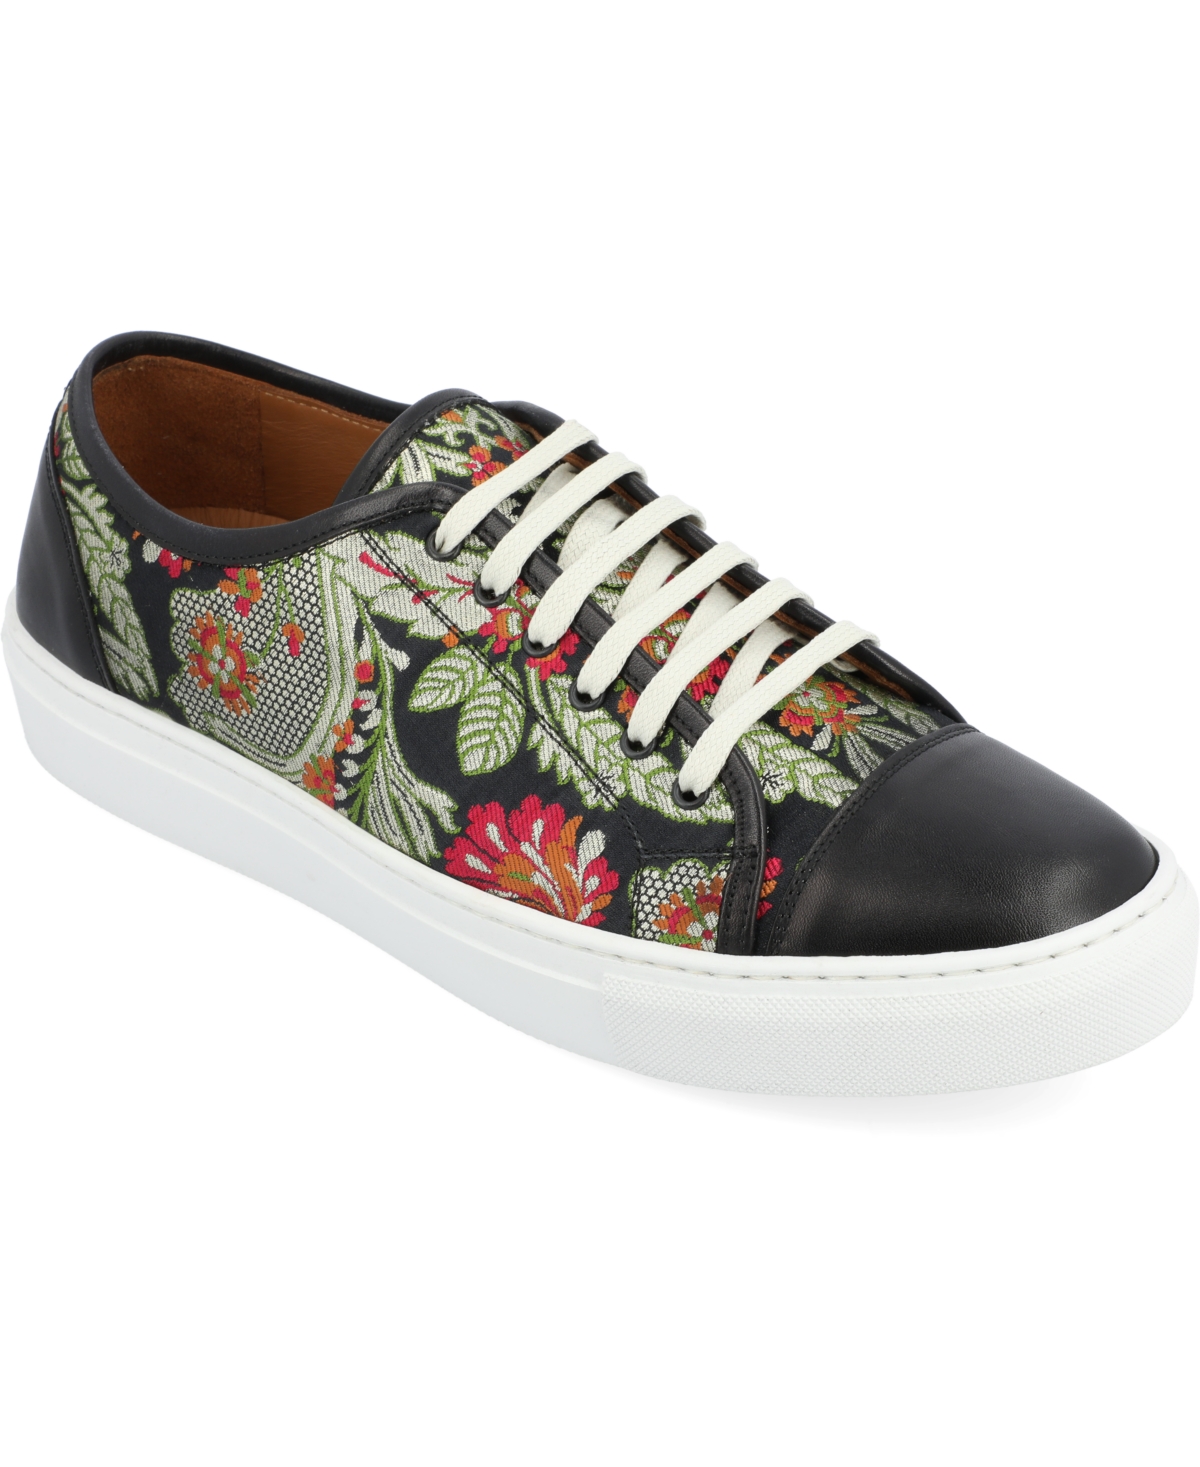 Men's Jack Handcrafted Leather and Floral Jacquard Low Top Casual Lace-up Sneakers - Victoria